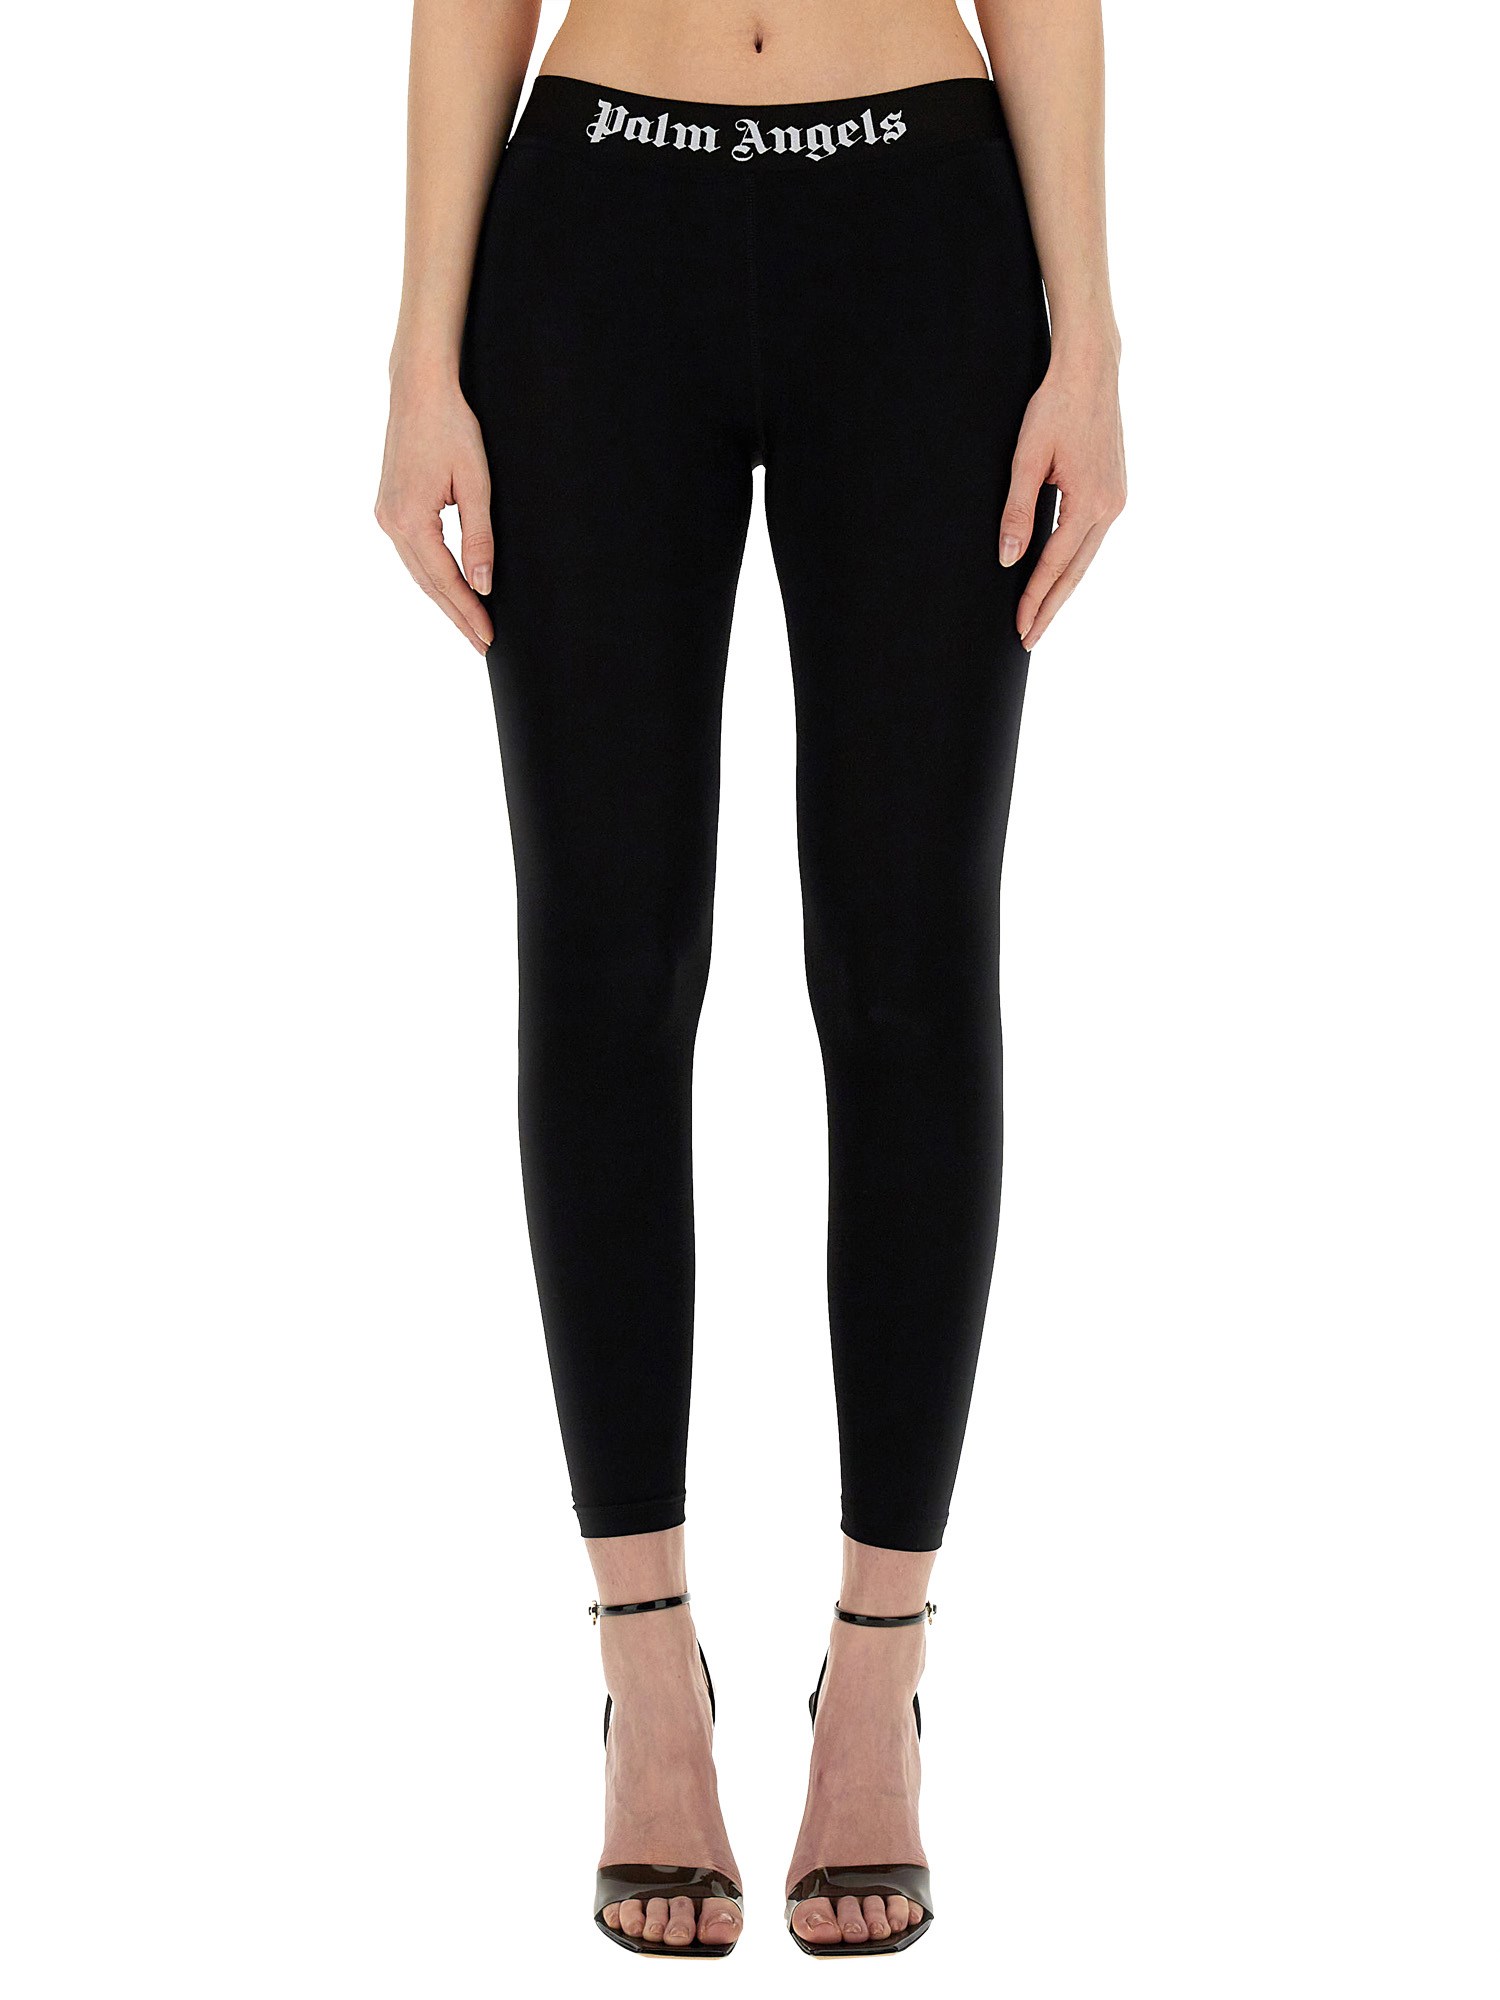 palm angels leggings with logo